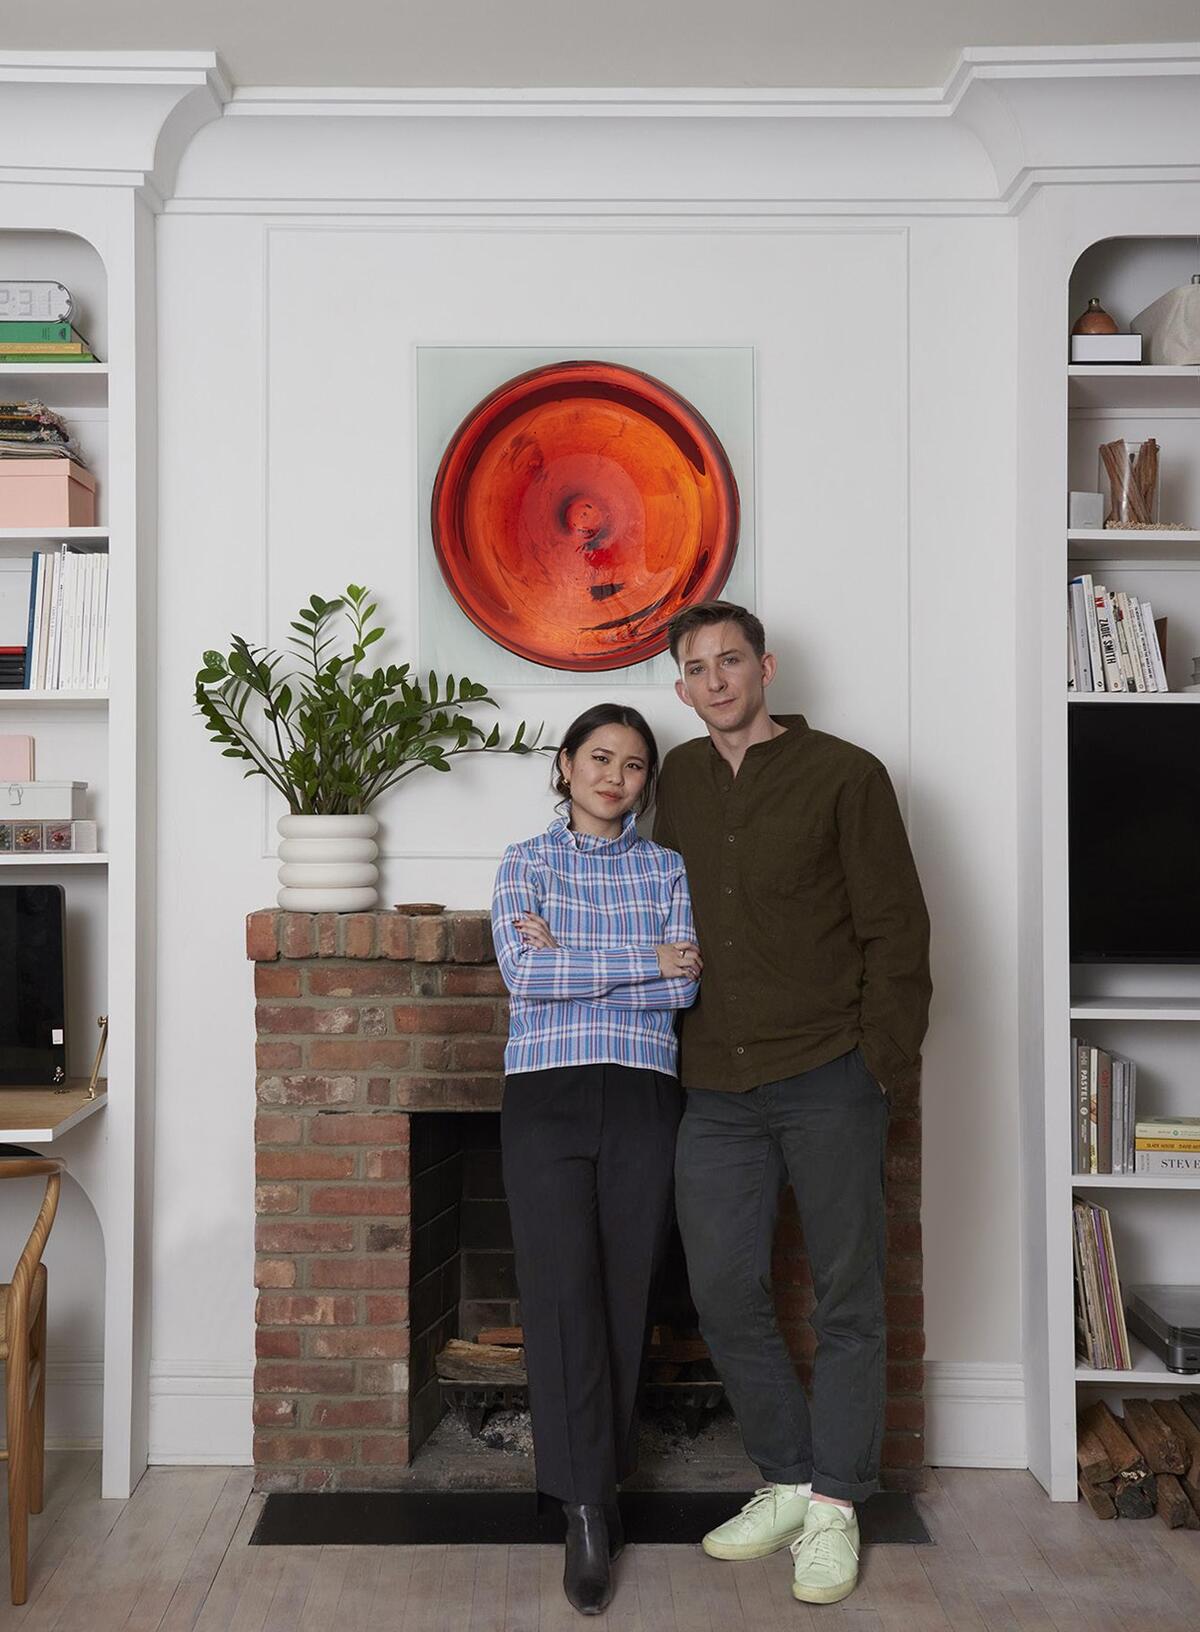 This design-driven couple is mixing art with function